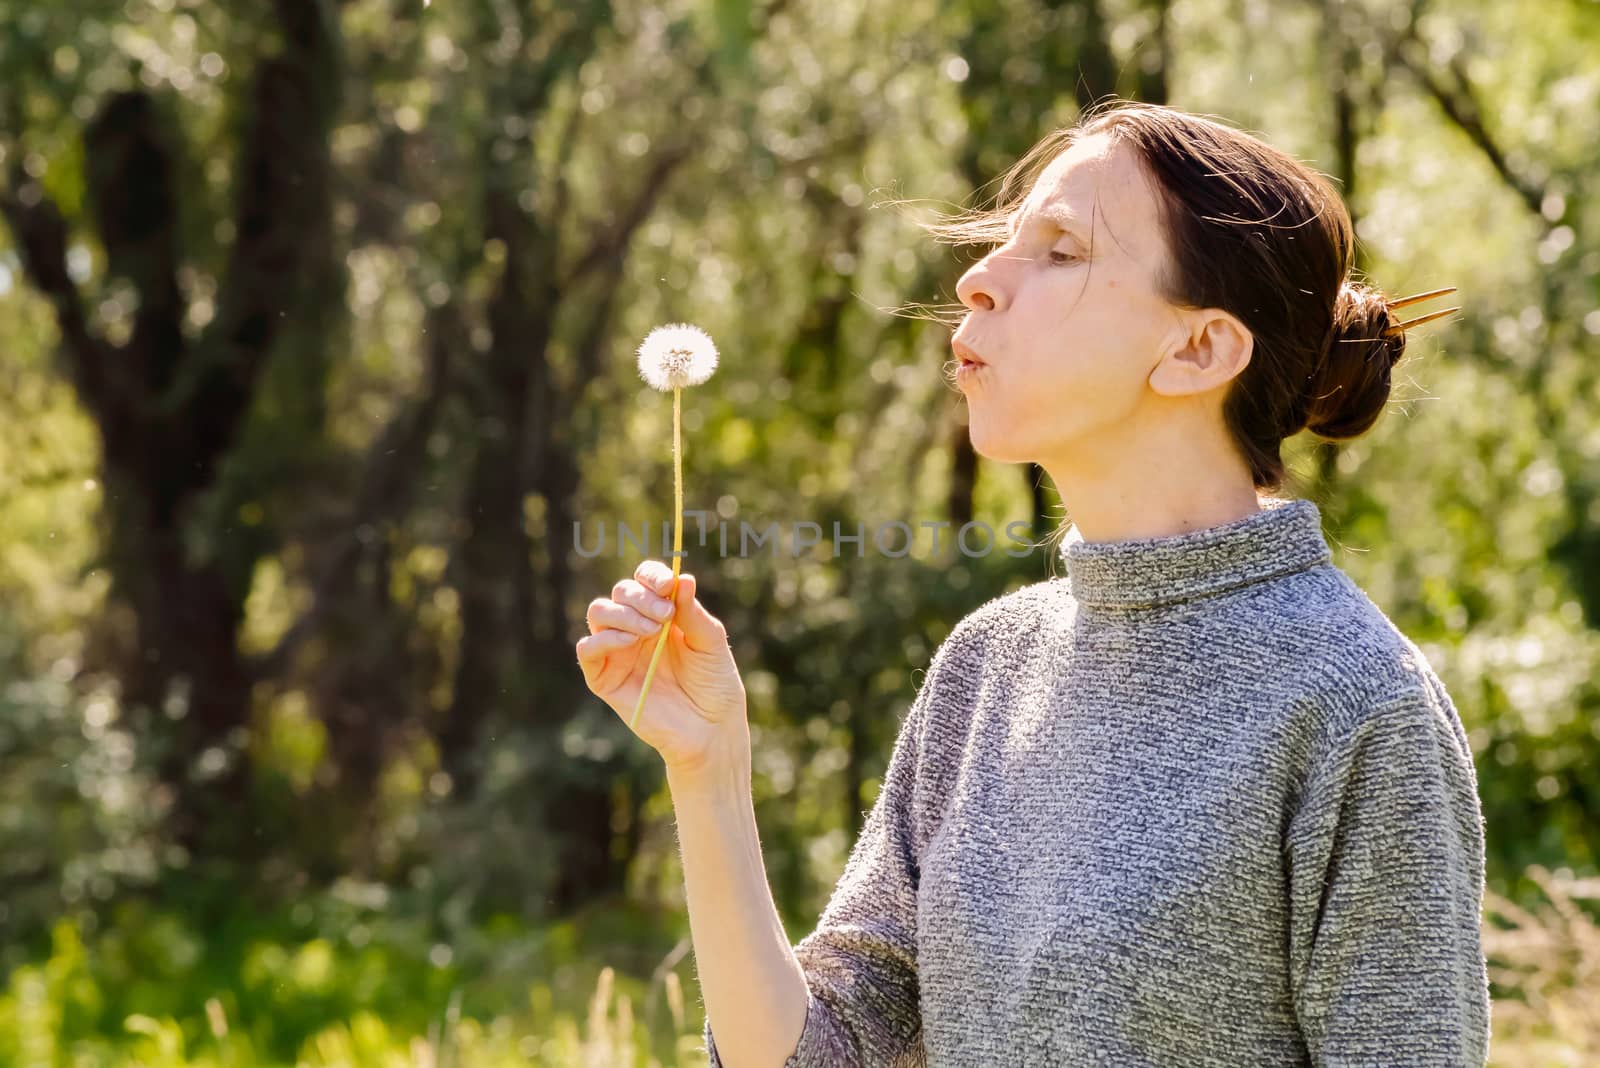 Adult woman blowing the seeds of a dandelion flower at the end of spring near to the forest